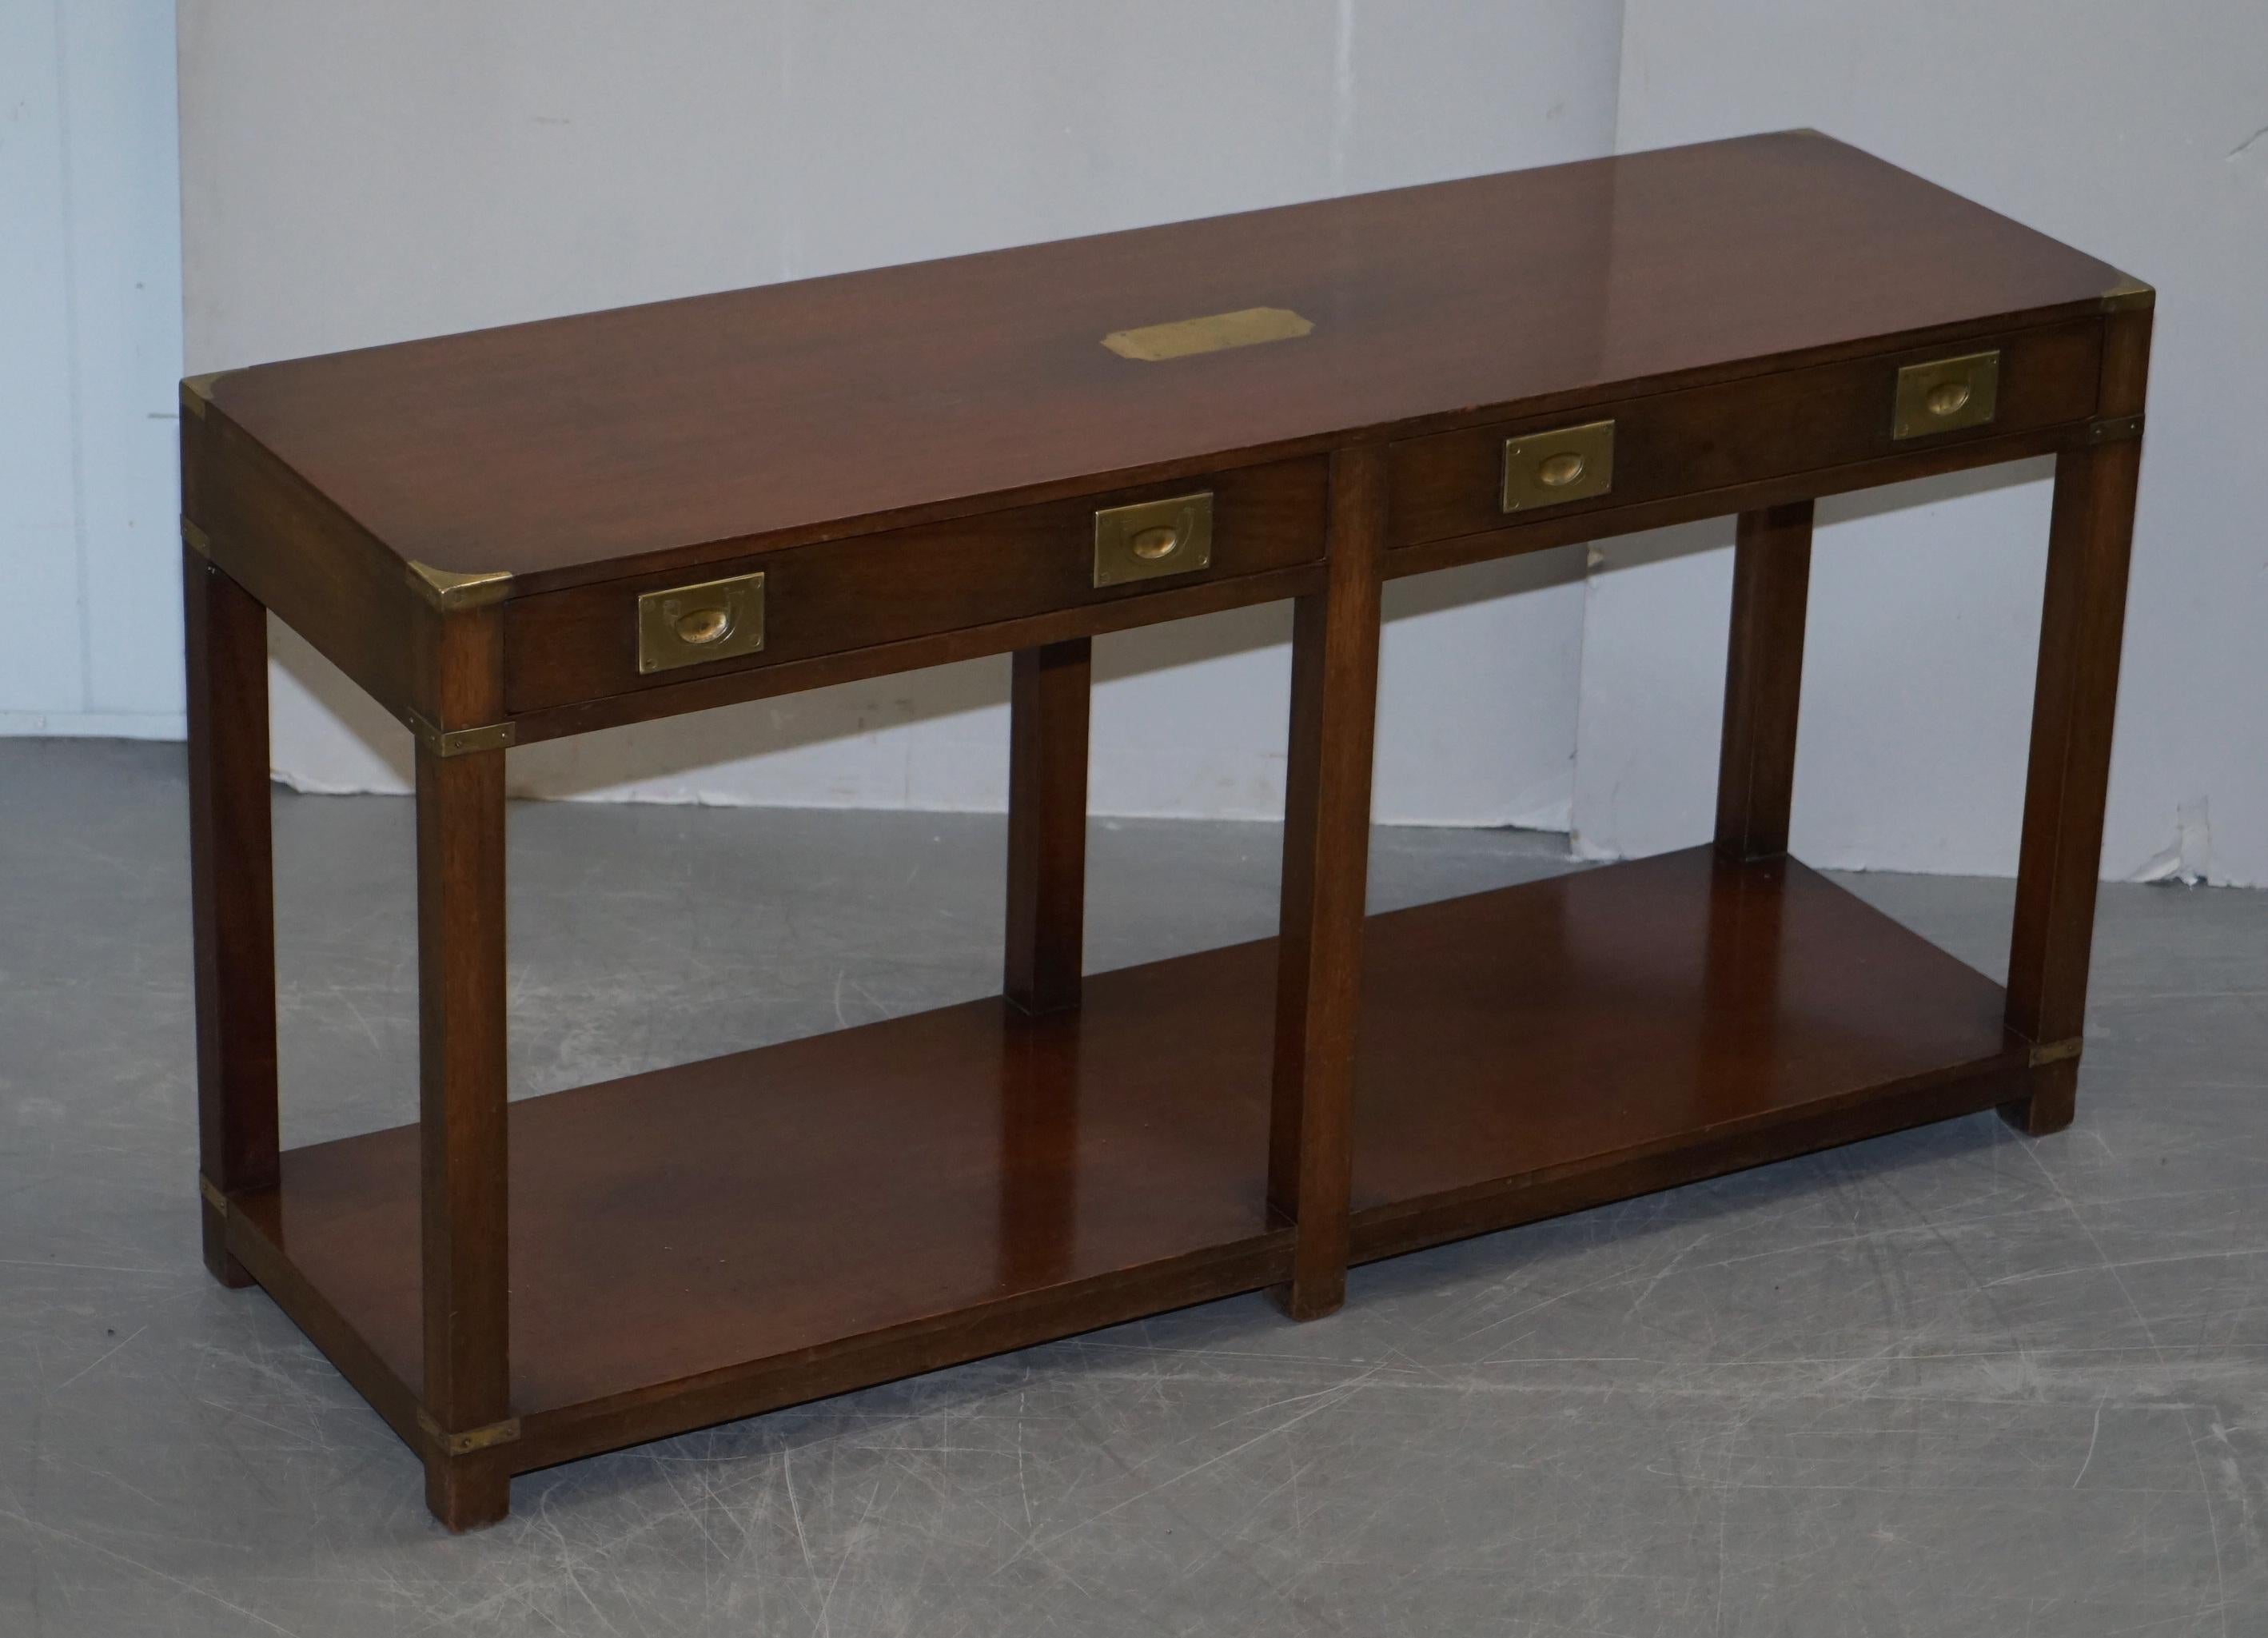 We are delighted to offer for sale this lovely pair of vintage Harrods London Kennedy Furniture Military Campaign console tables with twin drawers 

These were made by Kennedy Furniture who were Harrods oldest concession, they retailed with them